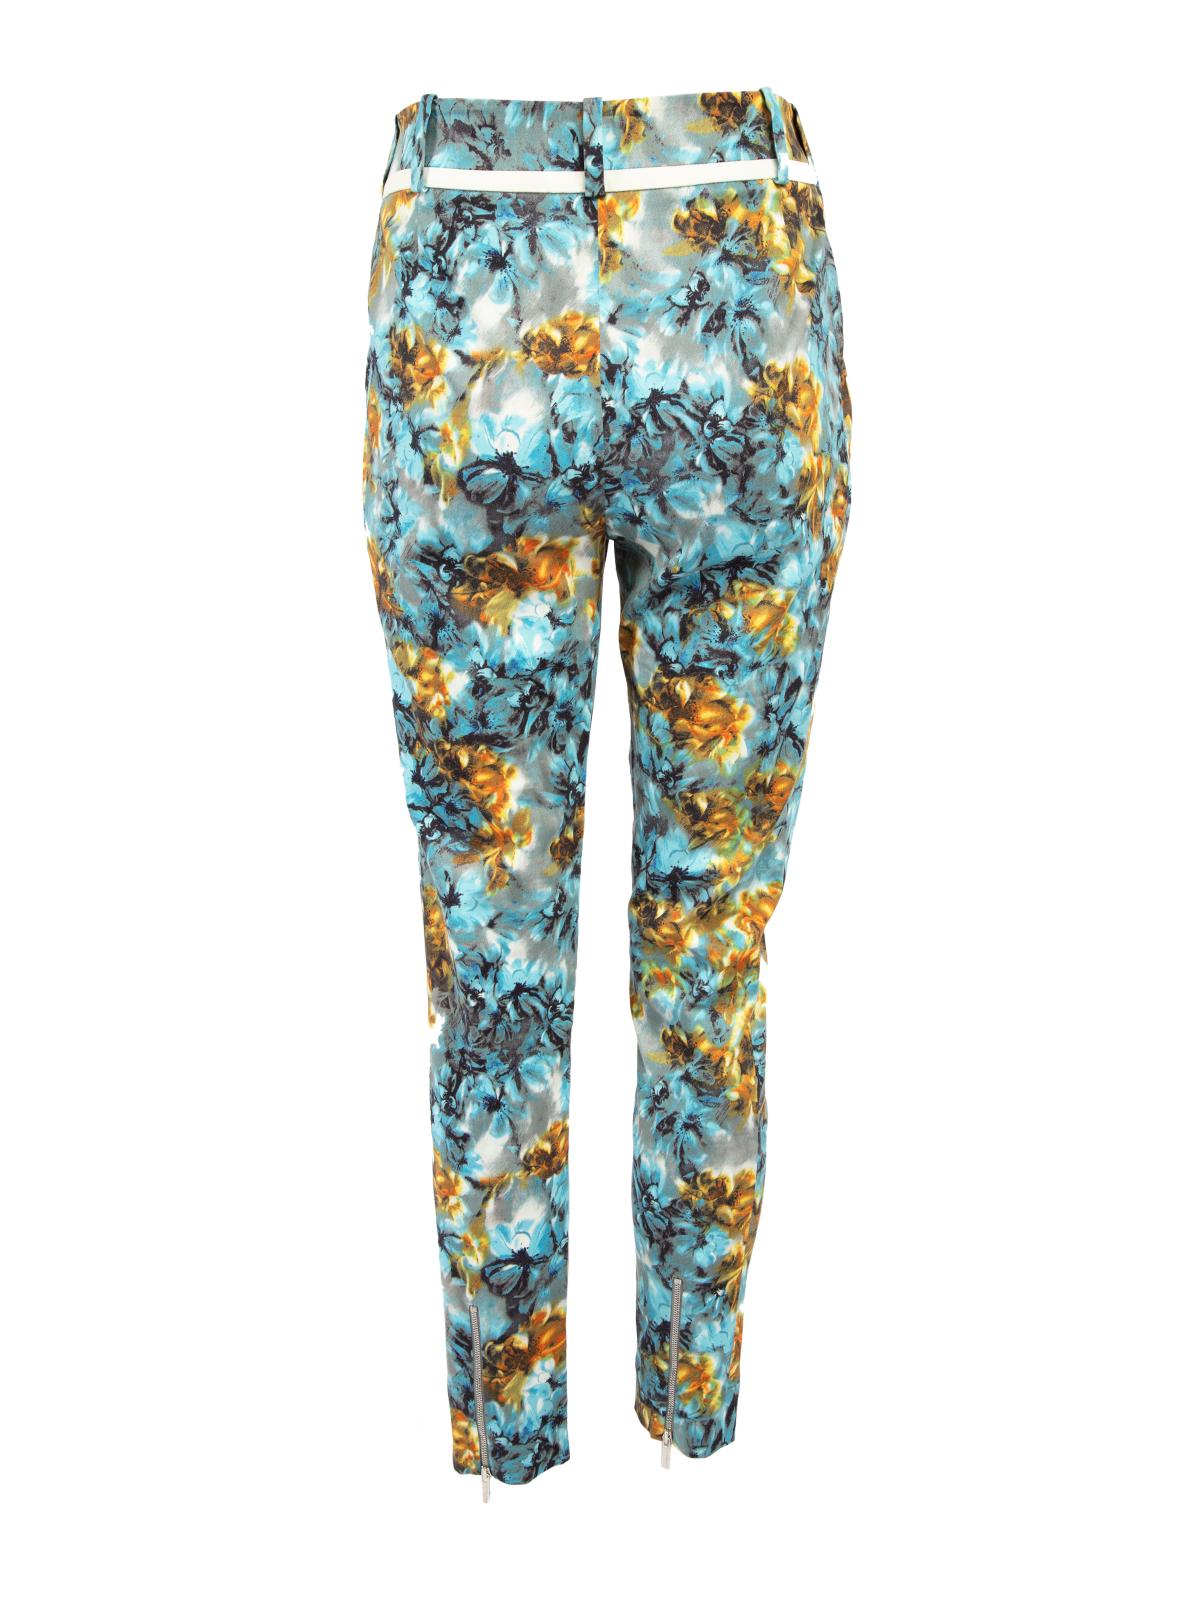 Karen Millen Women's Floral Trousers with Ankle Zip In Excellent Condition For Sale In London, GB